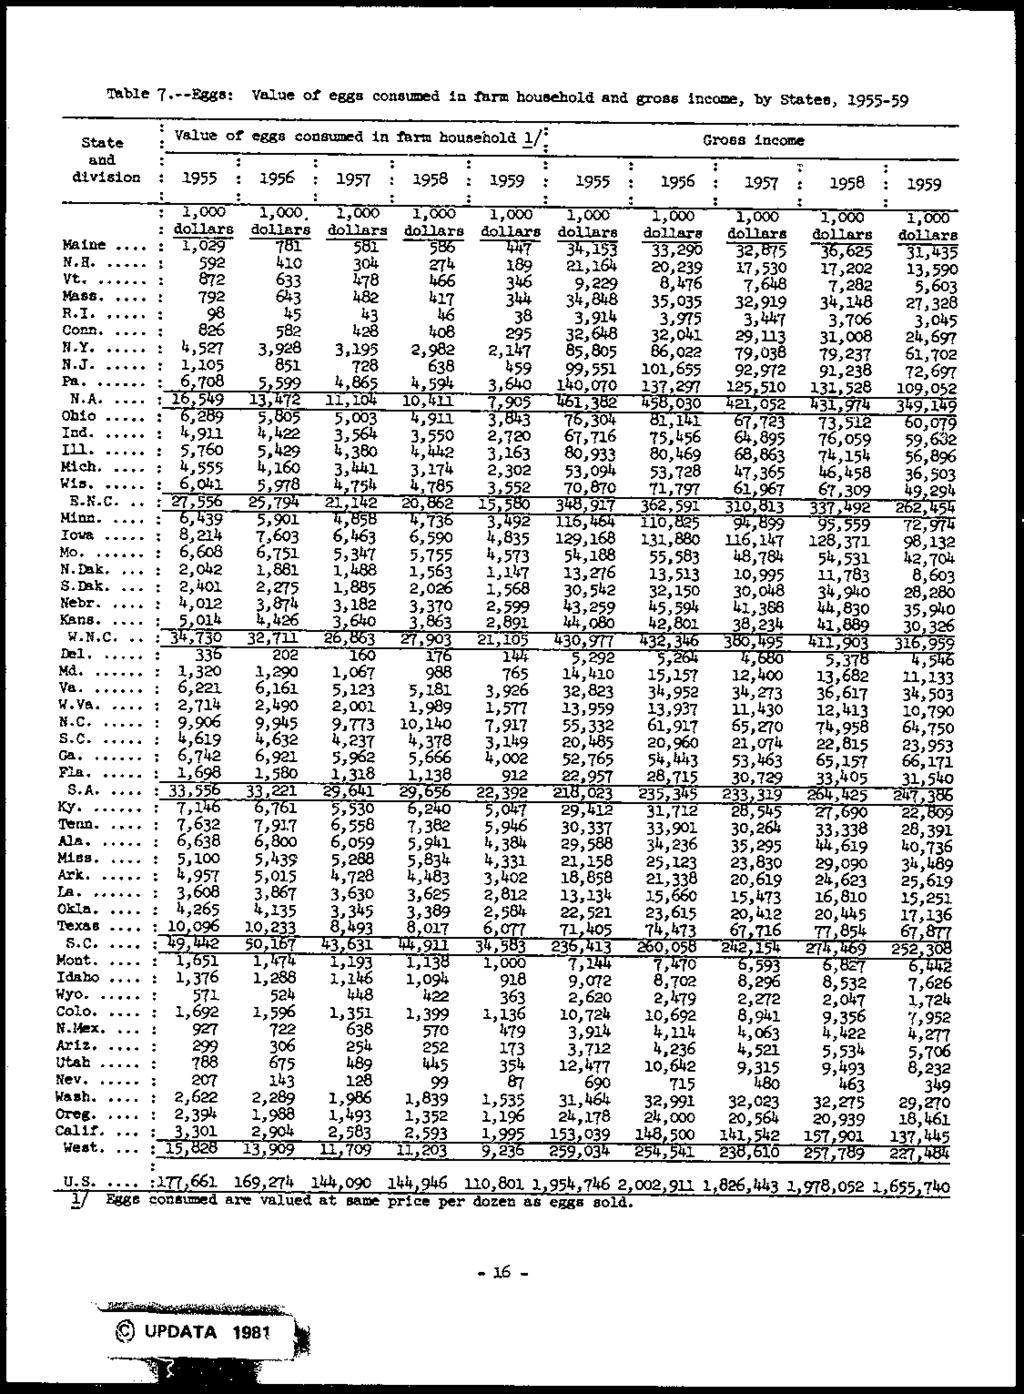 Table 7.--Eggs: Value of eggs consumed in farm household and gross income, by states, 1955-59. Valu~ State of eggs consumed in farm housebold 1;= - Gross income : and.